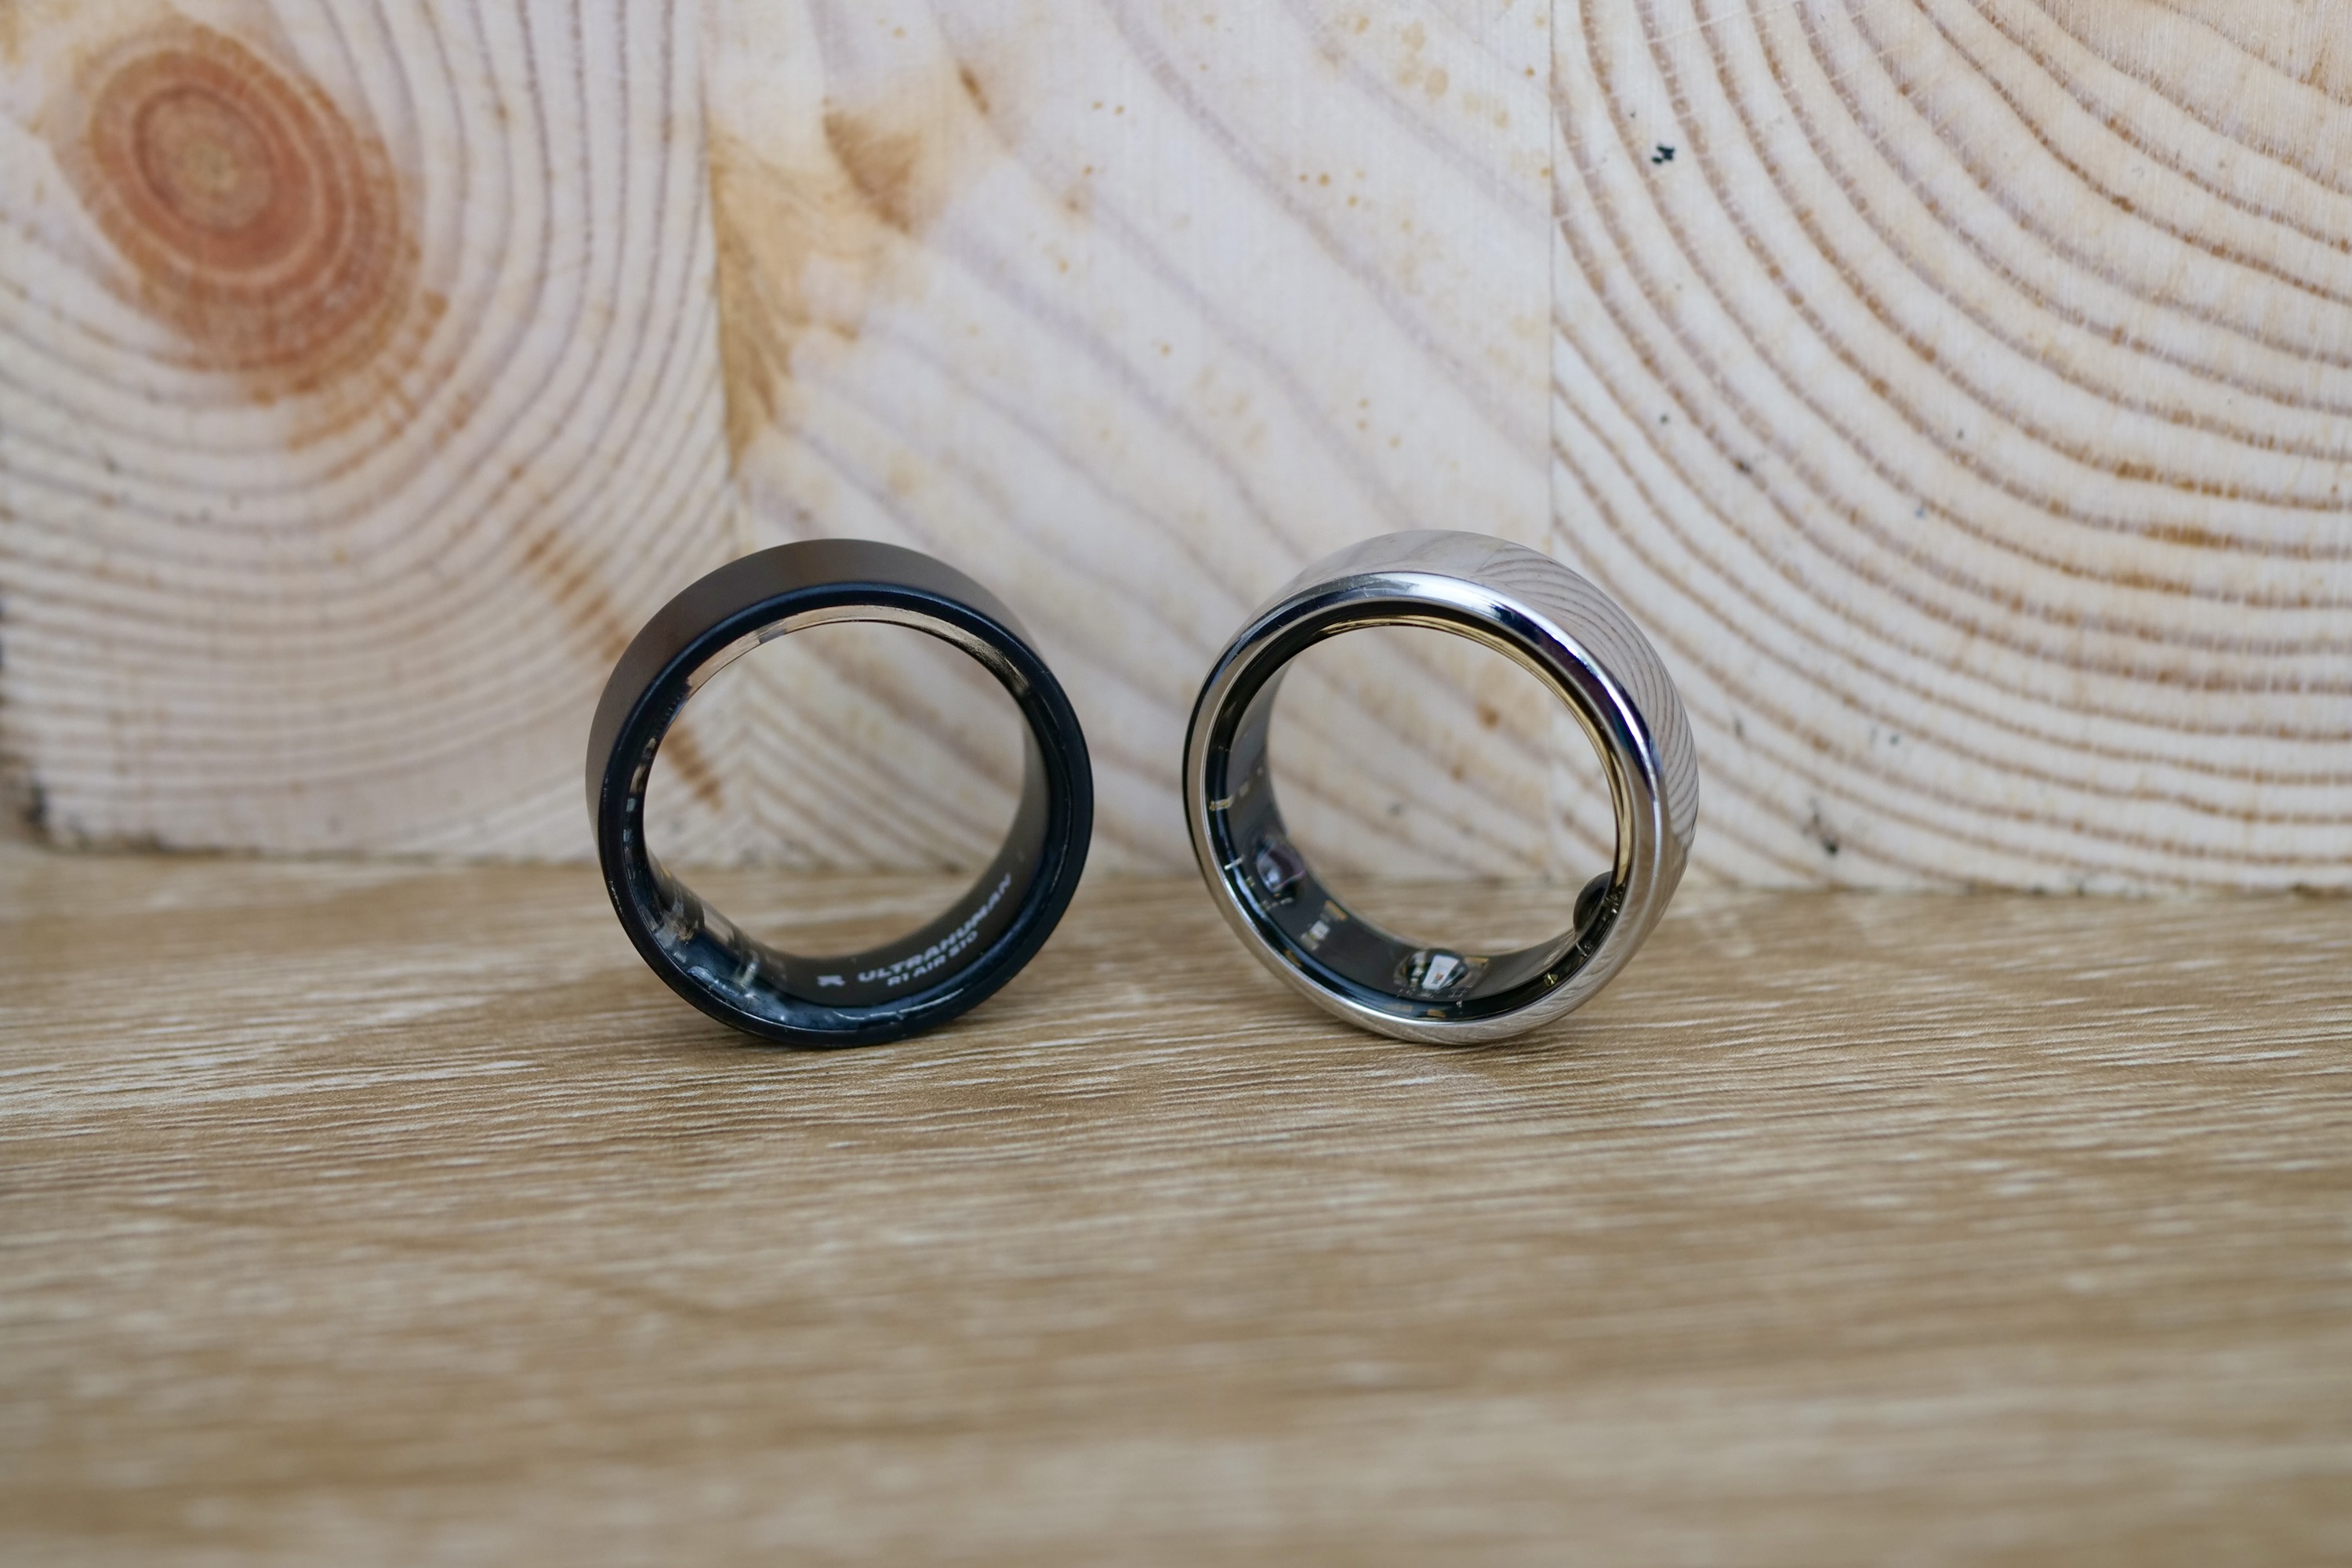 Budget Smart Rings UK Next Day Delivery